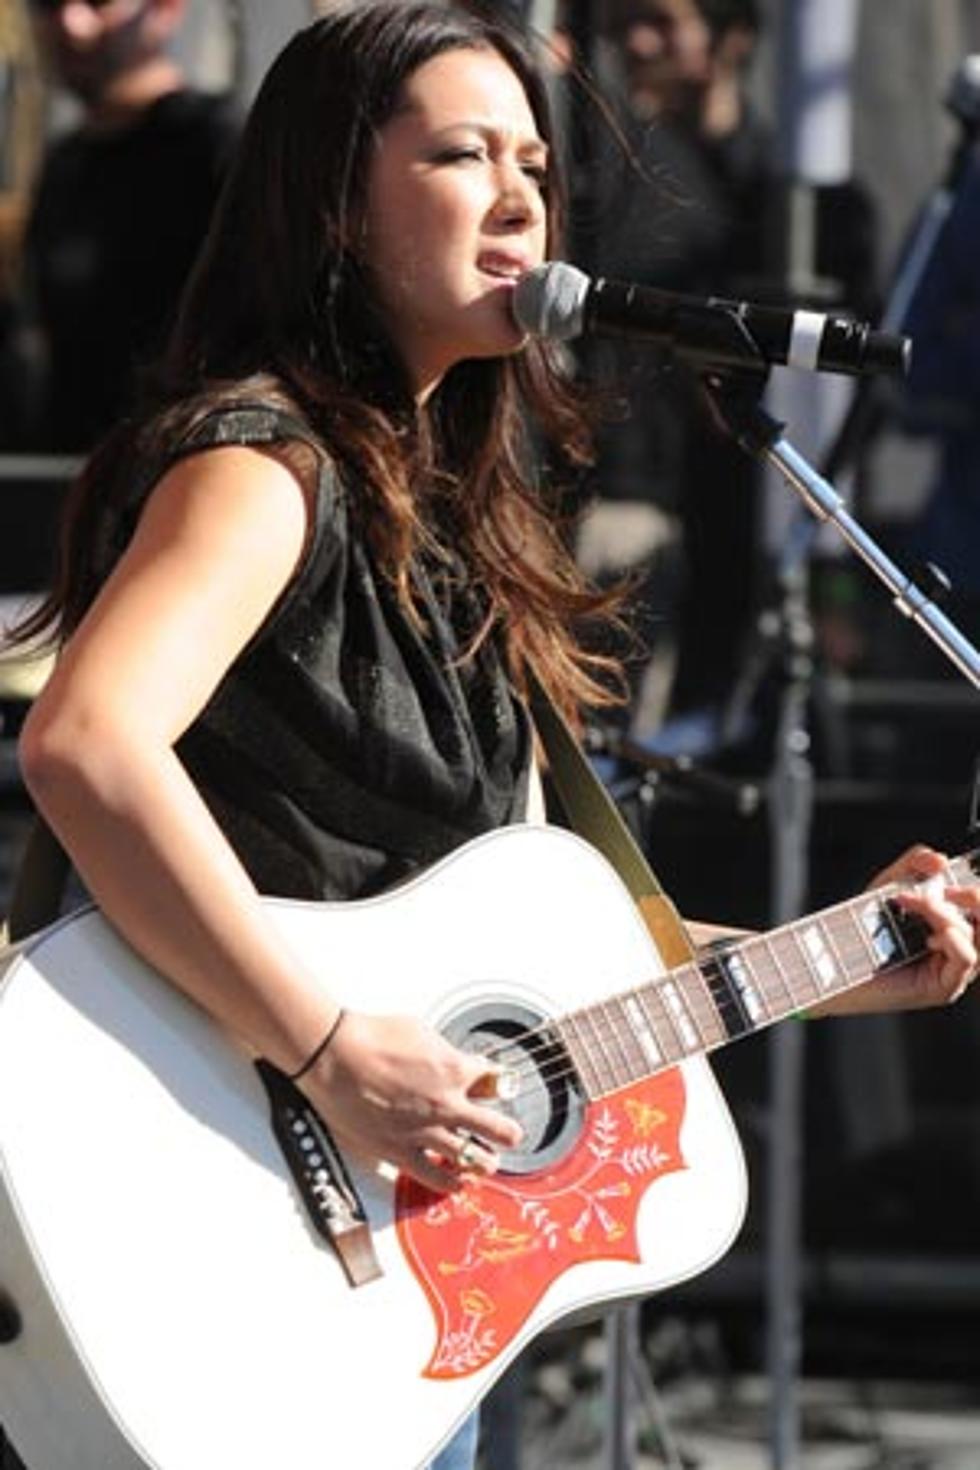 Michelle Branch Gives Sneak Peek of New Song 'What Don't Kill Ya